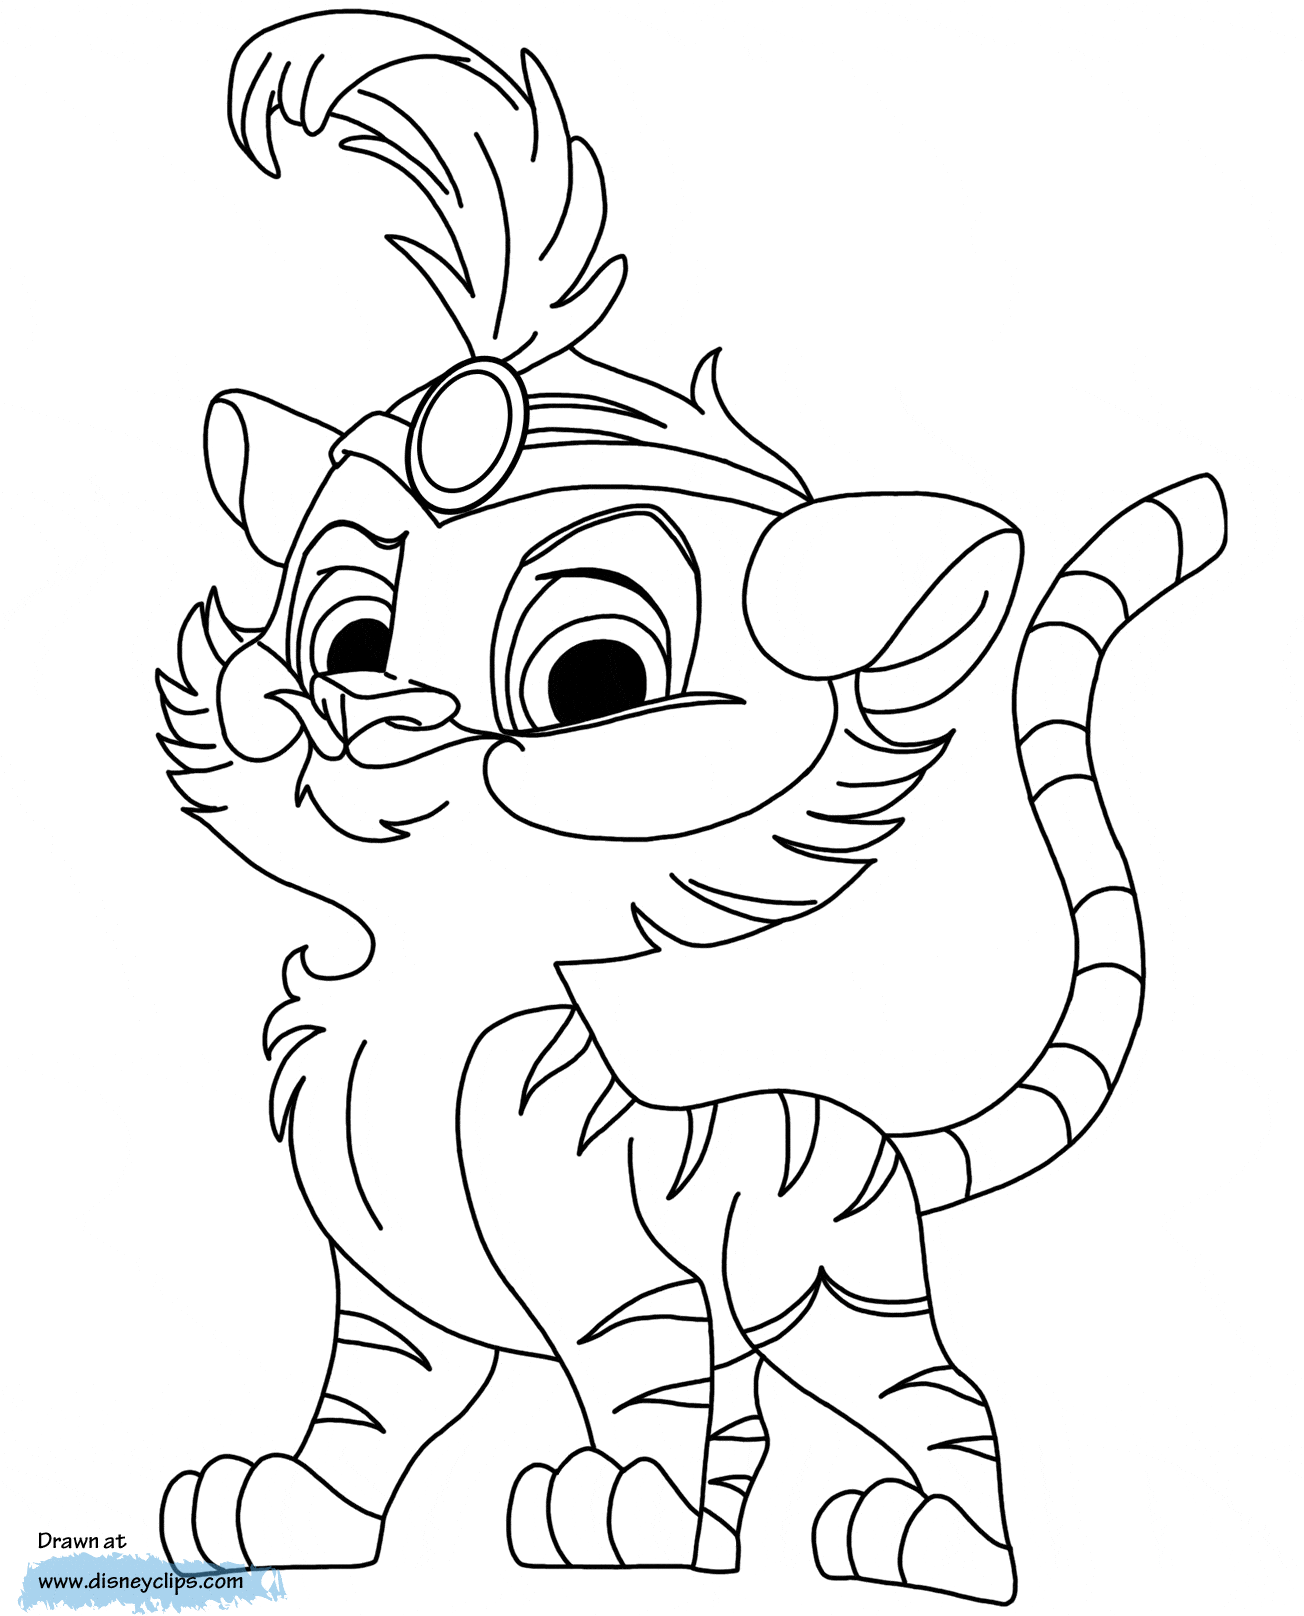 Palace pets, Coloring pages and Palaces